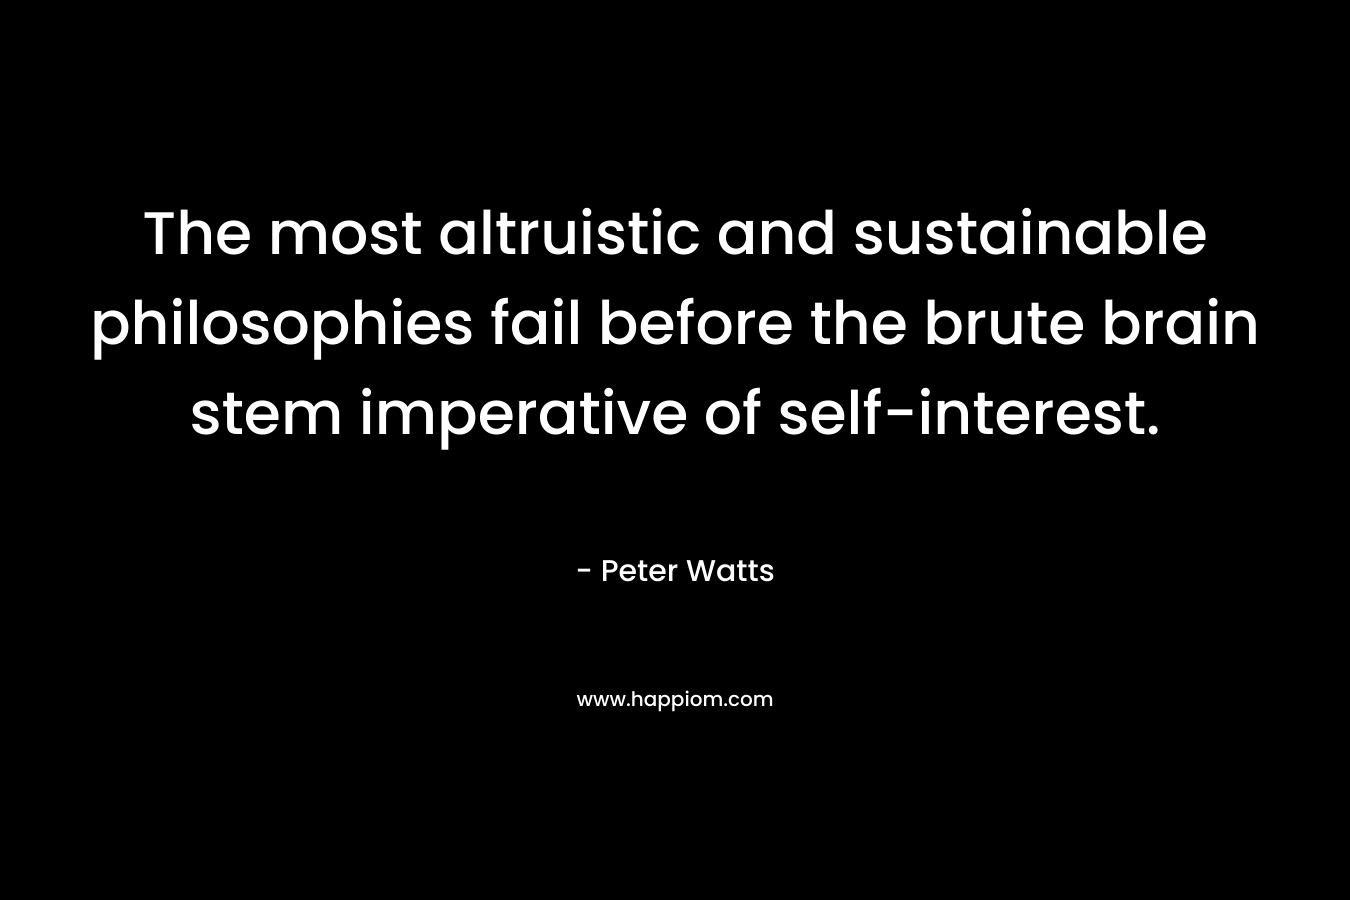 The most altruistic and sustainable philosophies fail before the brute brain stem imperative of self-interest.